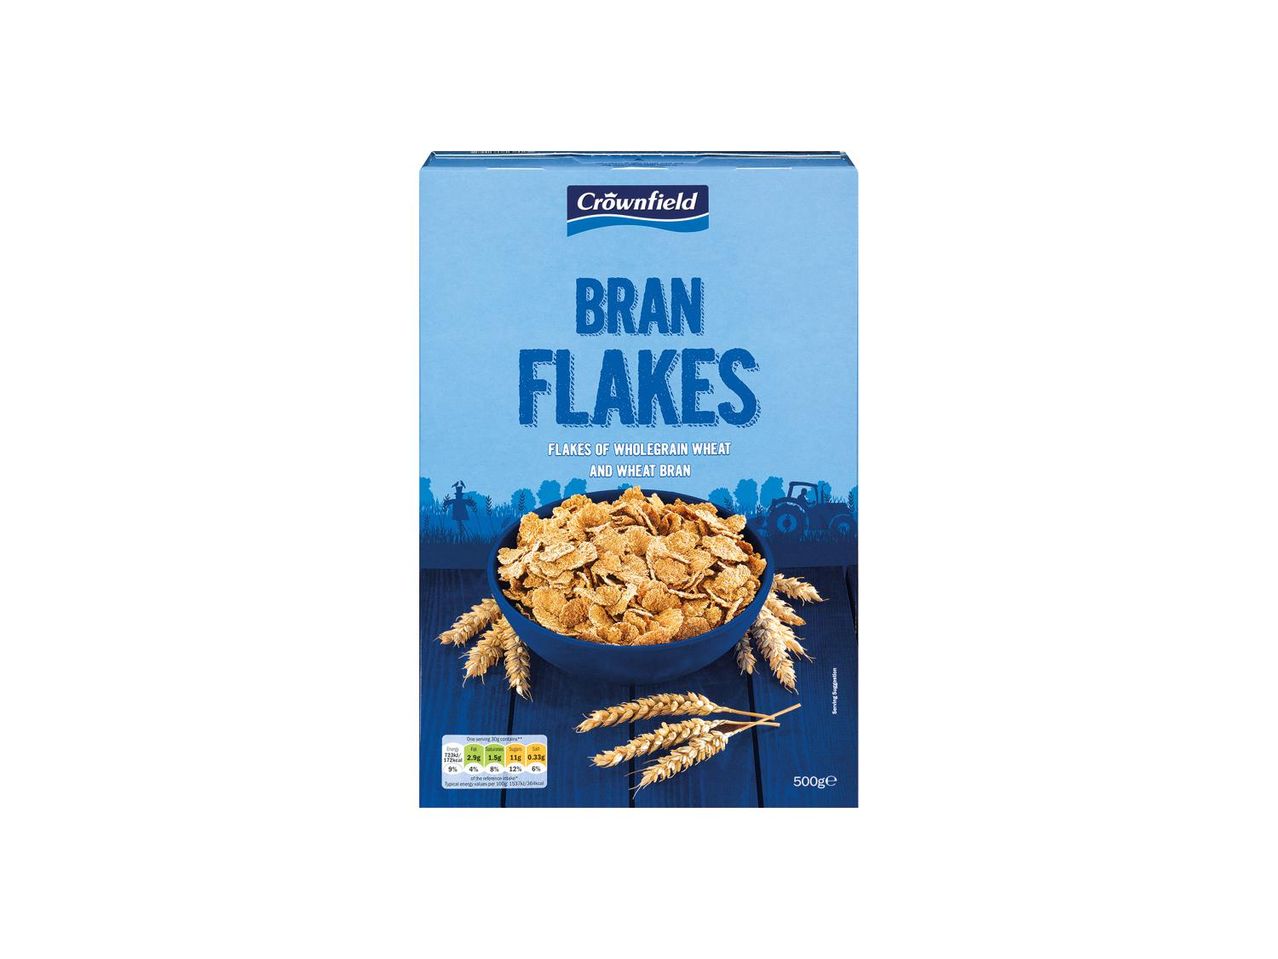 Go to full screen view: Crownfield Bran Flakes - Image 1